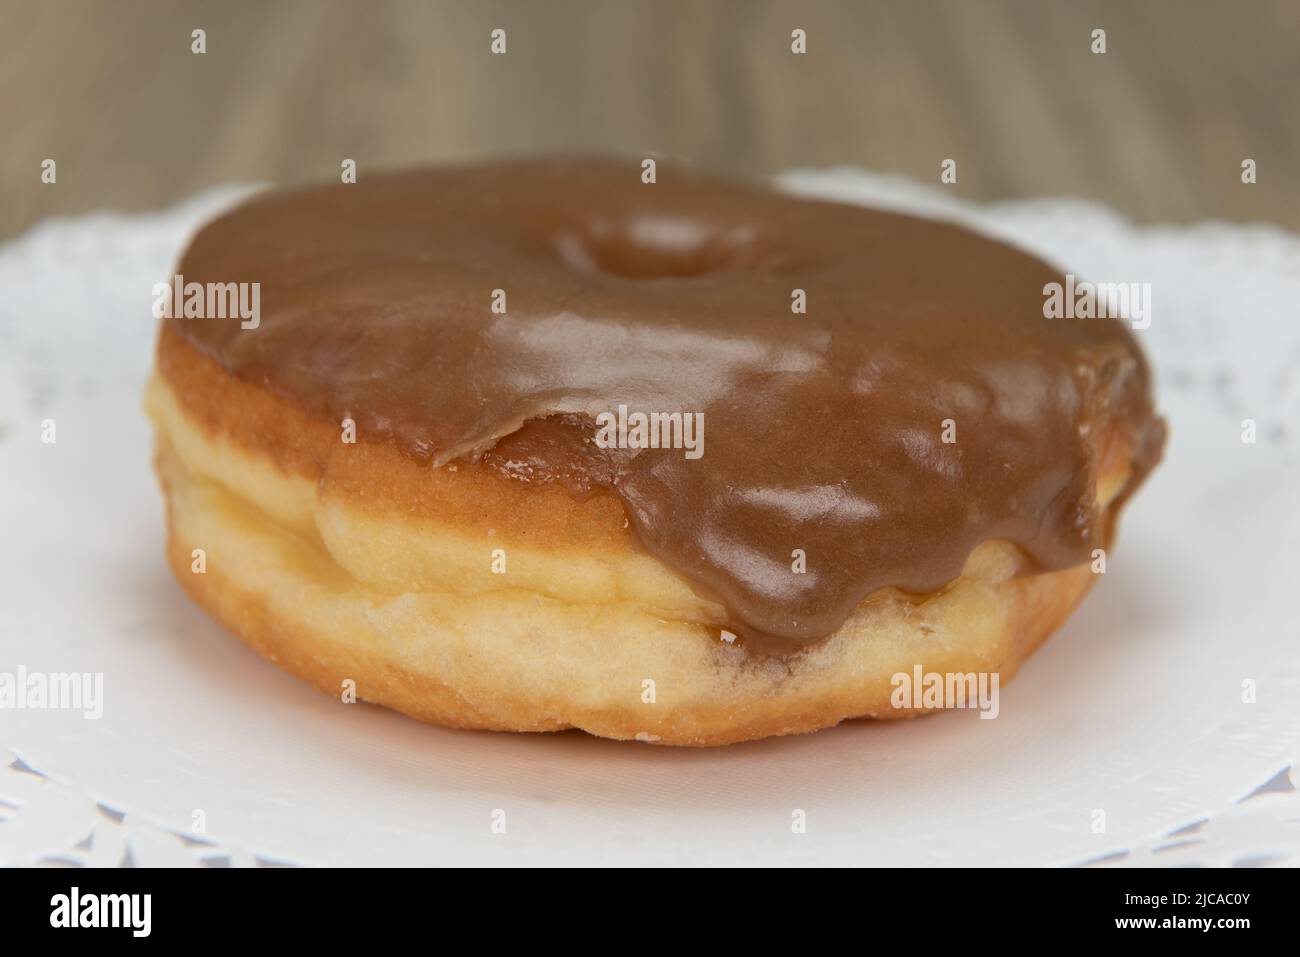 Tempting fresh from the oven maple donut from the bakery served on a plate. Stock Photo